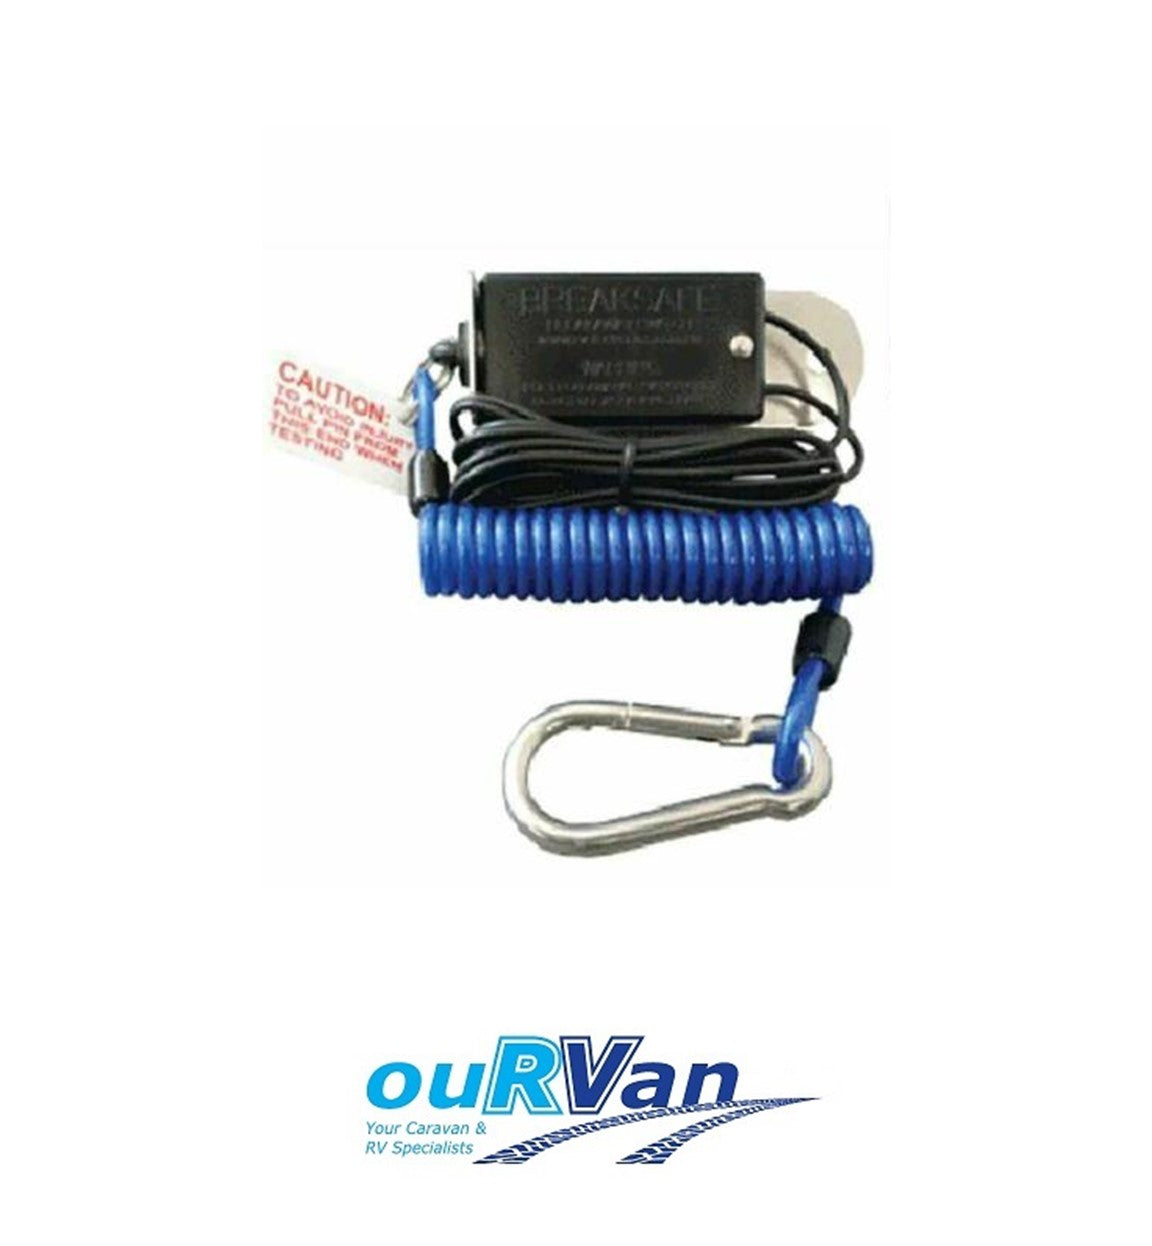 Breaksafe Switch With Coil Cable For Breakaway 6000 - Caravan RV Trailer 5000